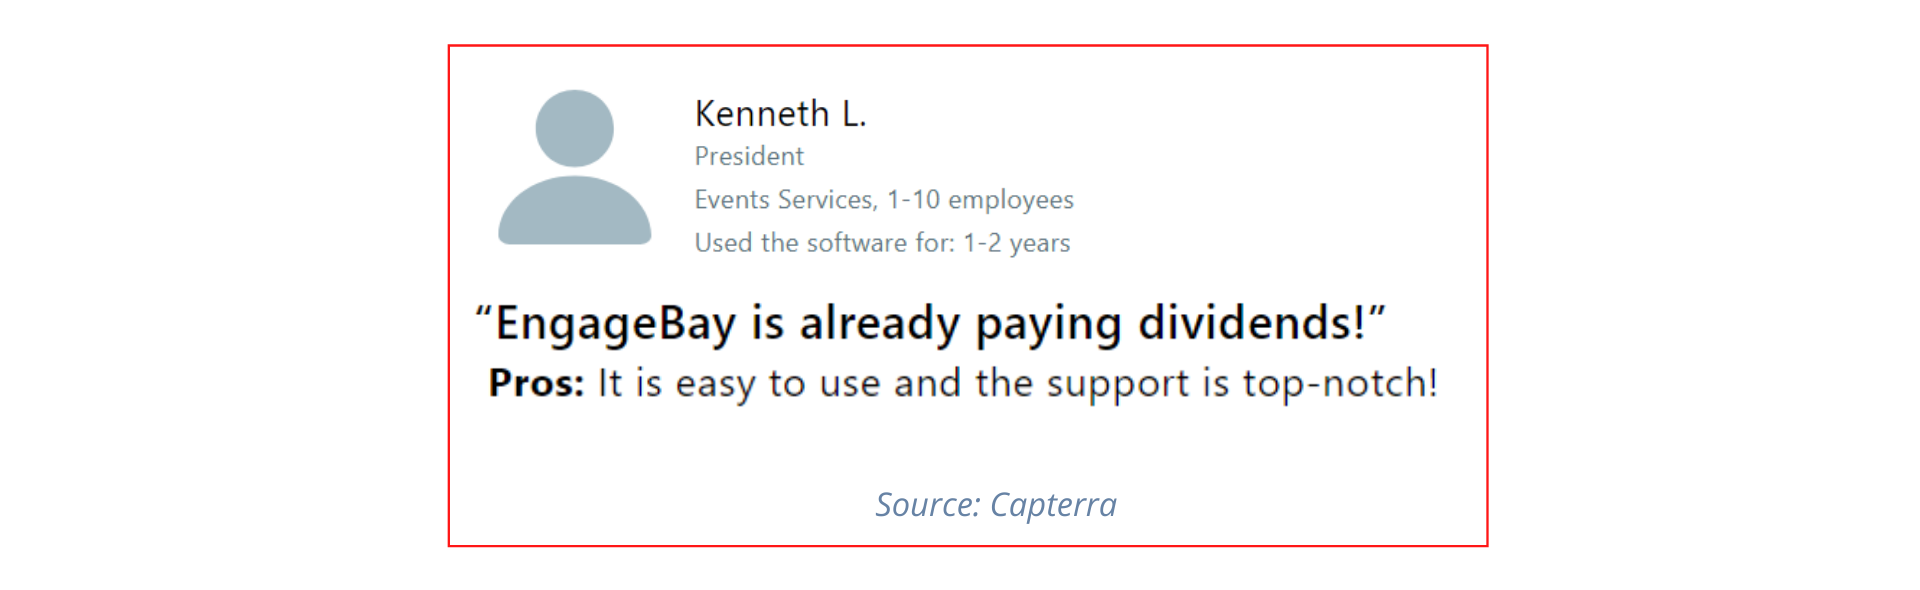 EngageBay review on Capterra